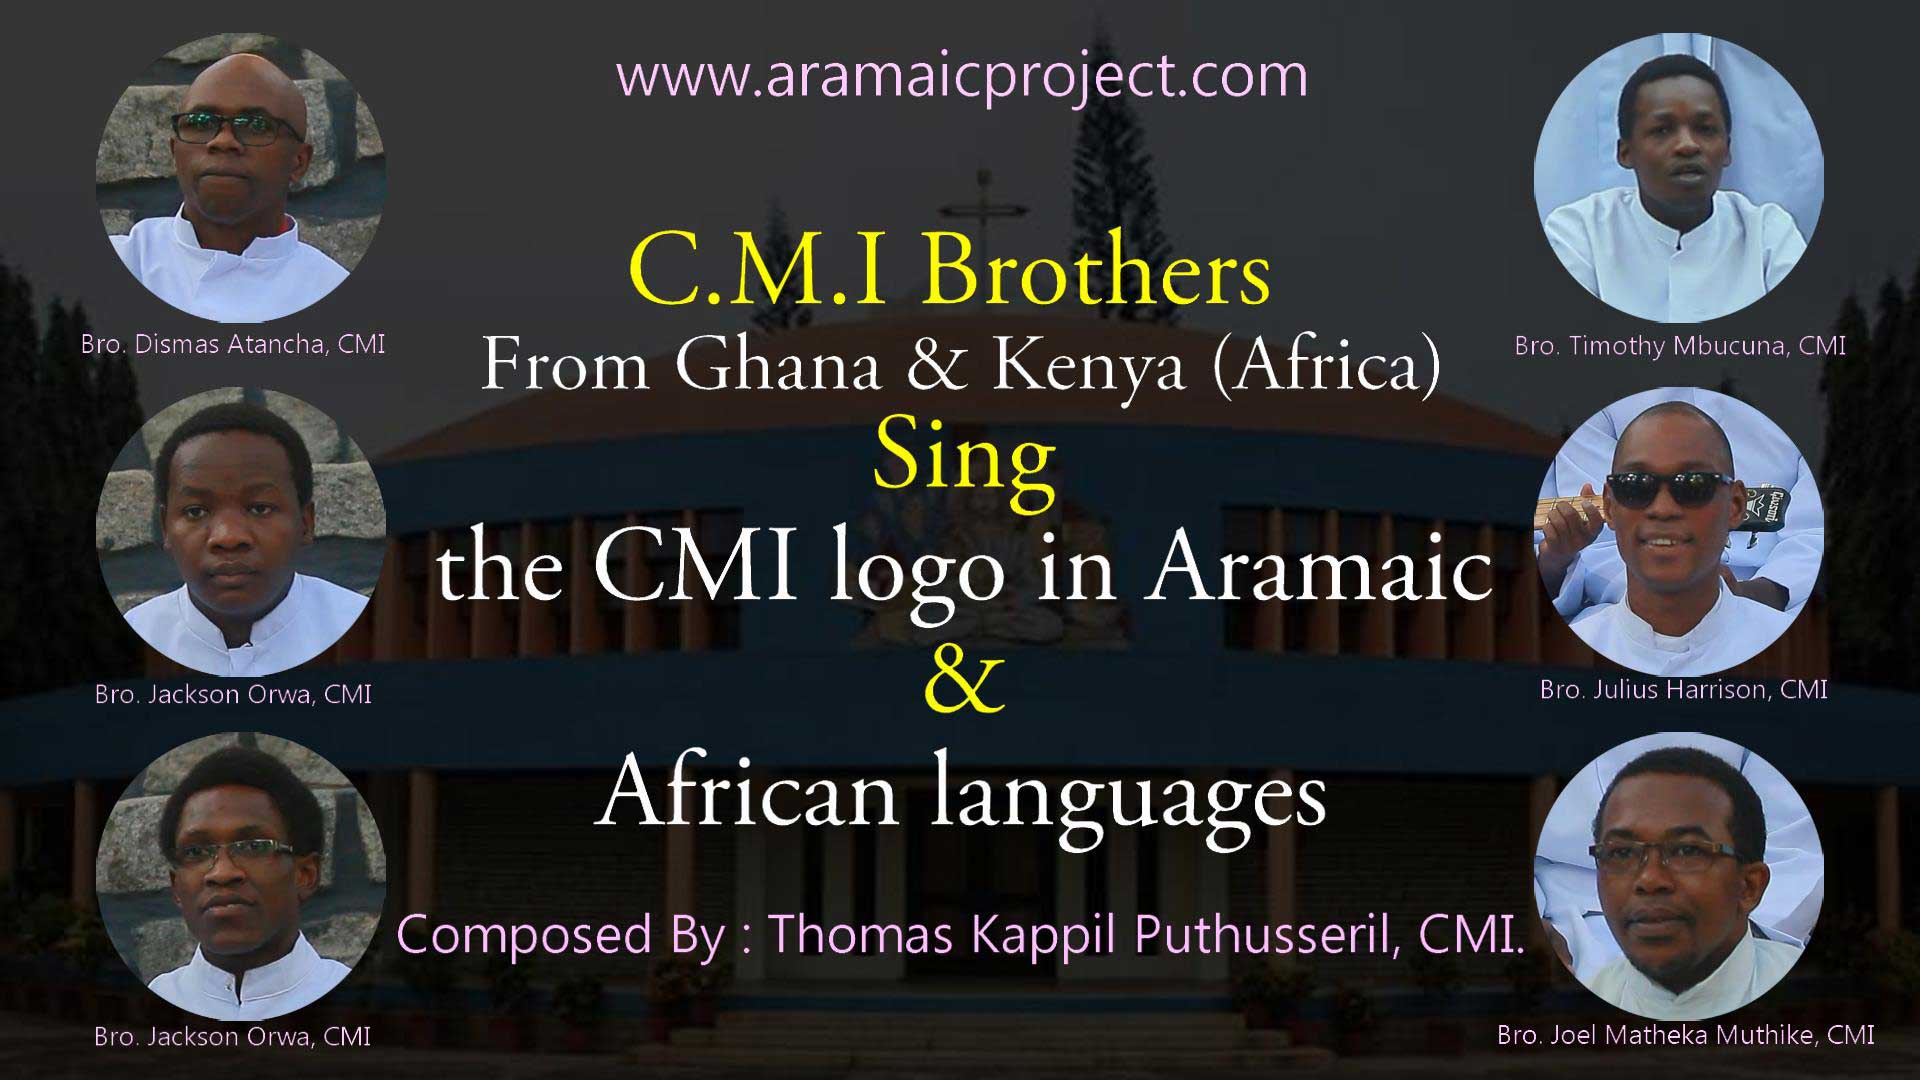   CMI Brothers from Africa 